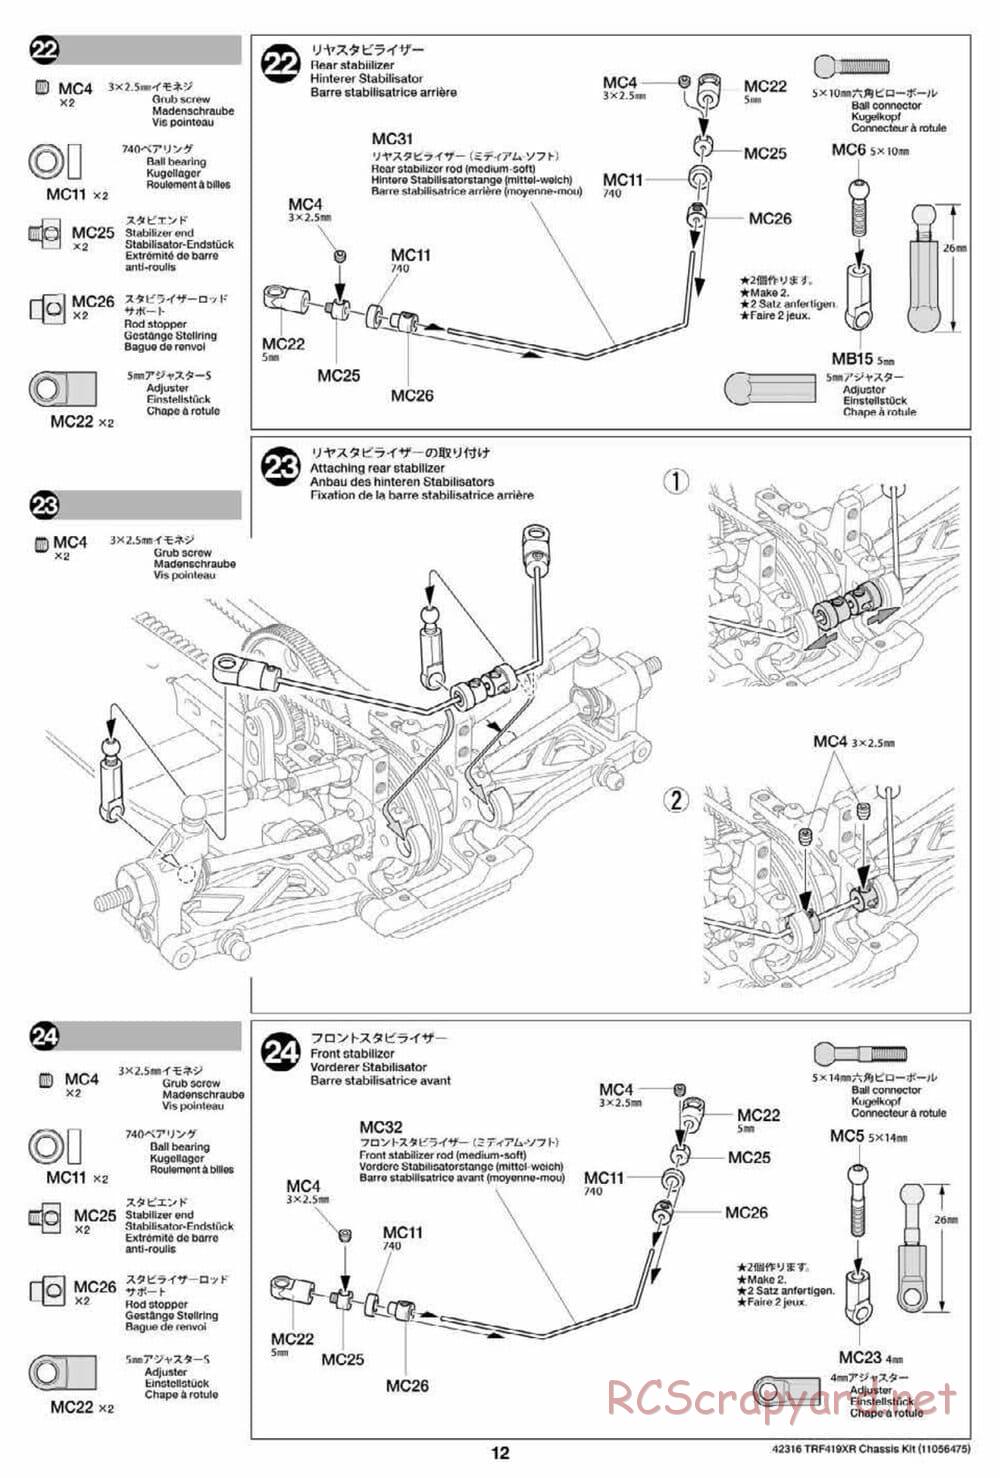 Tamiya - TRF419XR Chassis - Manual - Page 12